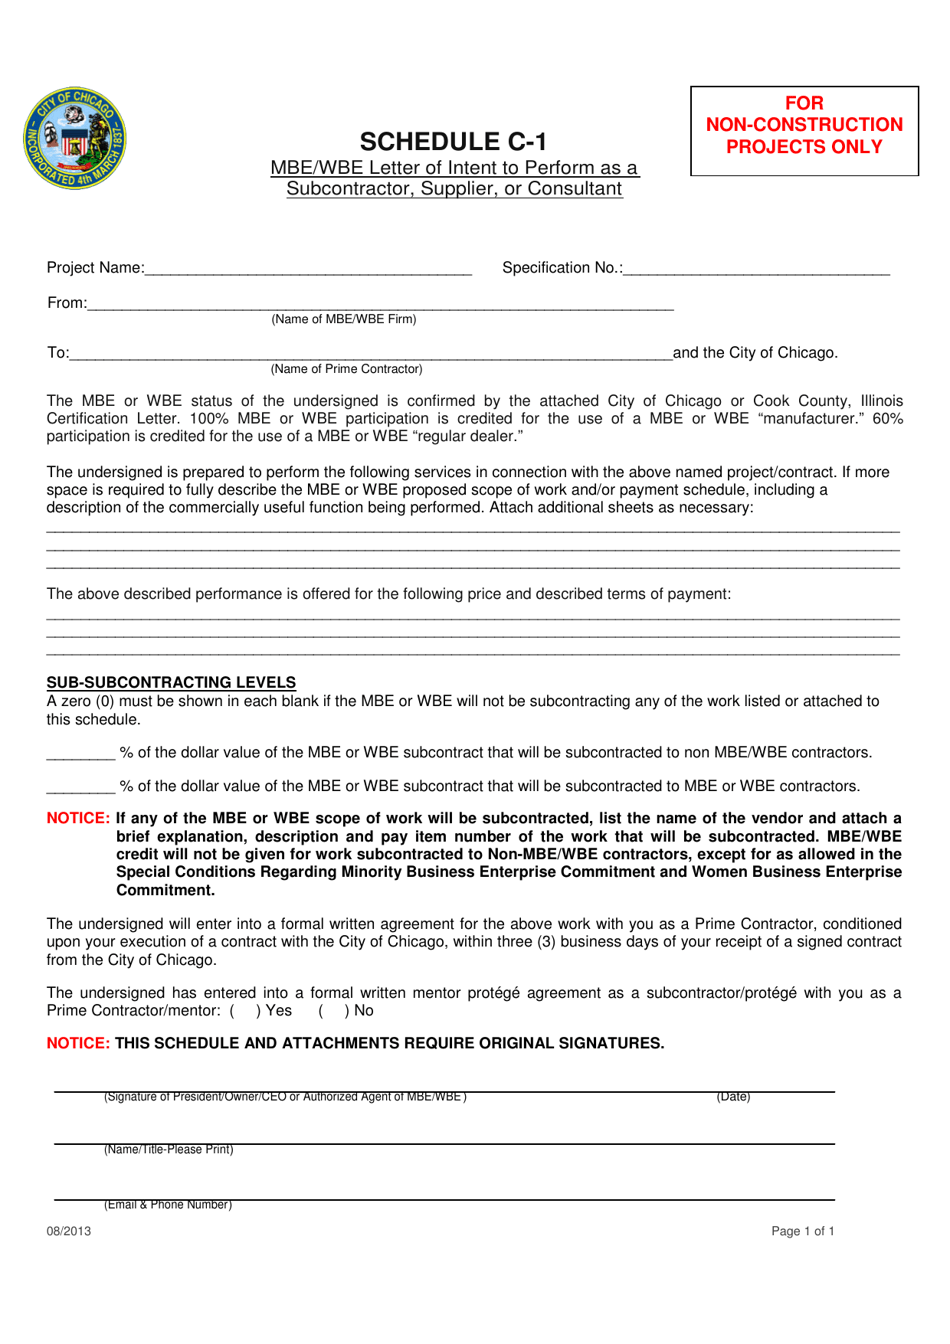 Schedule C-1 Mbe / Wbe Letter of Intent to Perform as a Subcontractor, Supplier, or Consultant - City of Chicago, Illinois, Page 1